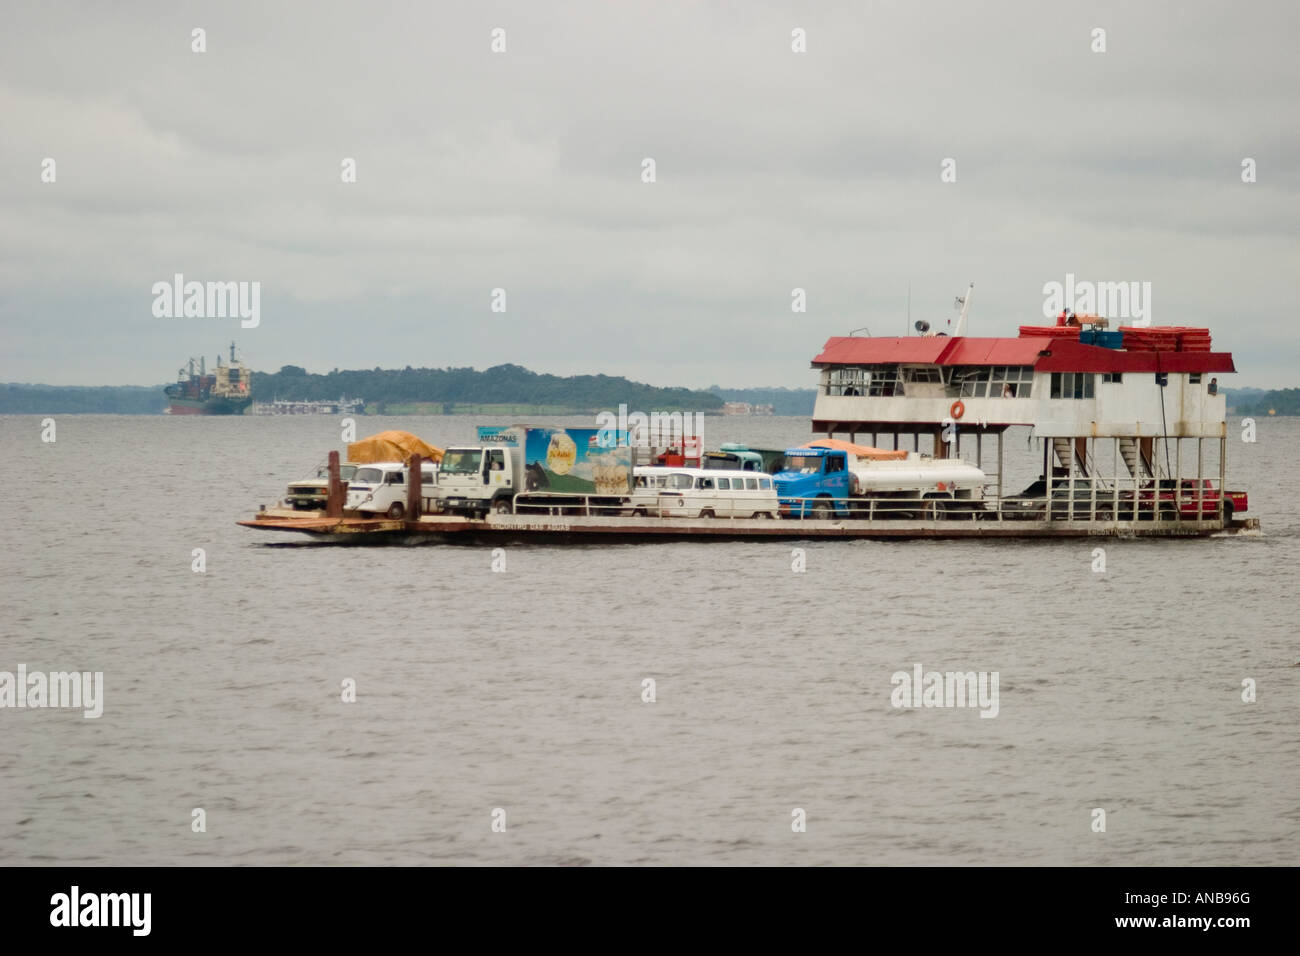 Ferry Boat Cars High Resolution Stock Photography and Images - Alamy